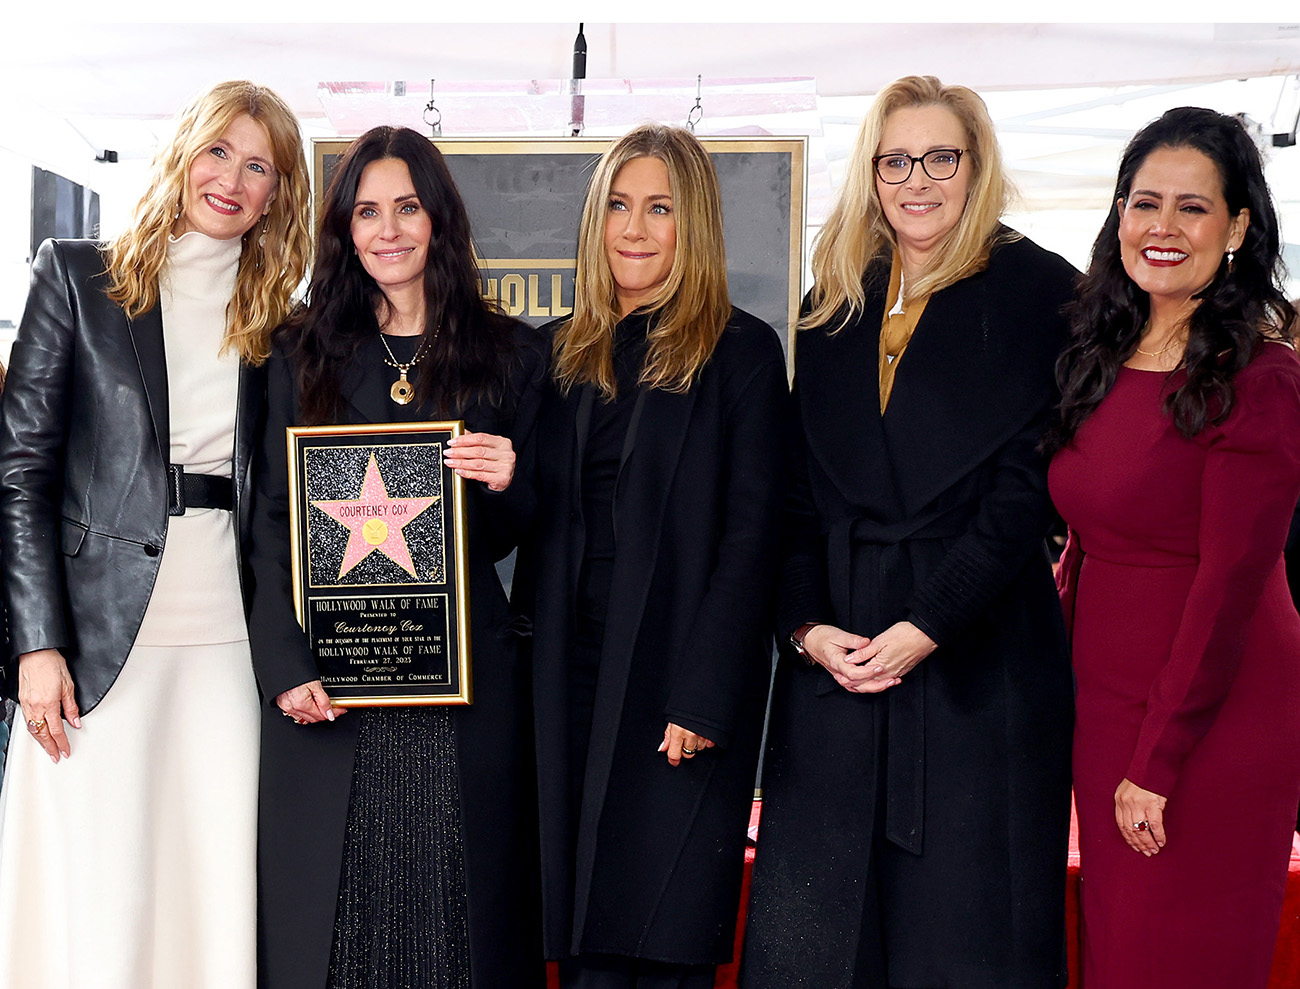 HOLLYWOOD, CALIFORNIA - FEBRUARY 27: (L-R) Laura Dern, Courtney Cox, Jennifer Aniston, Lisa Kudrow and Lupita Sanchez Cornejo, Hollywood Chamber of Commerce Chair attend the Hollywood Walk of Fame Star Ceremony for Courteney Cox on February 27, 2023 in Hollywood, California. (Photo by Leon Bennett/Getty Images)